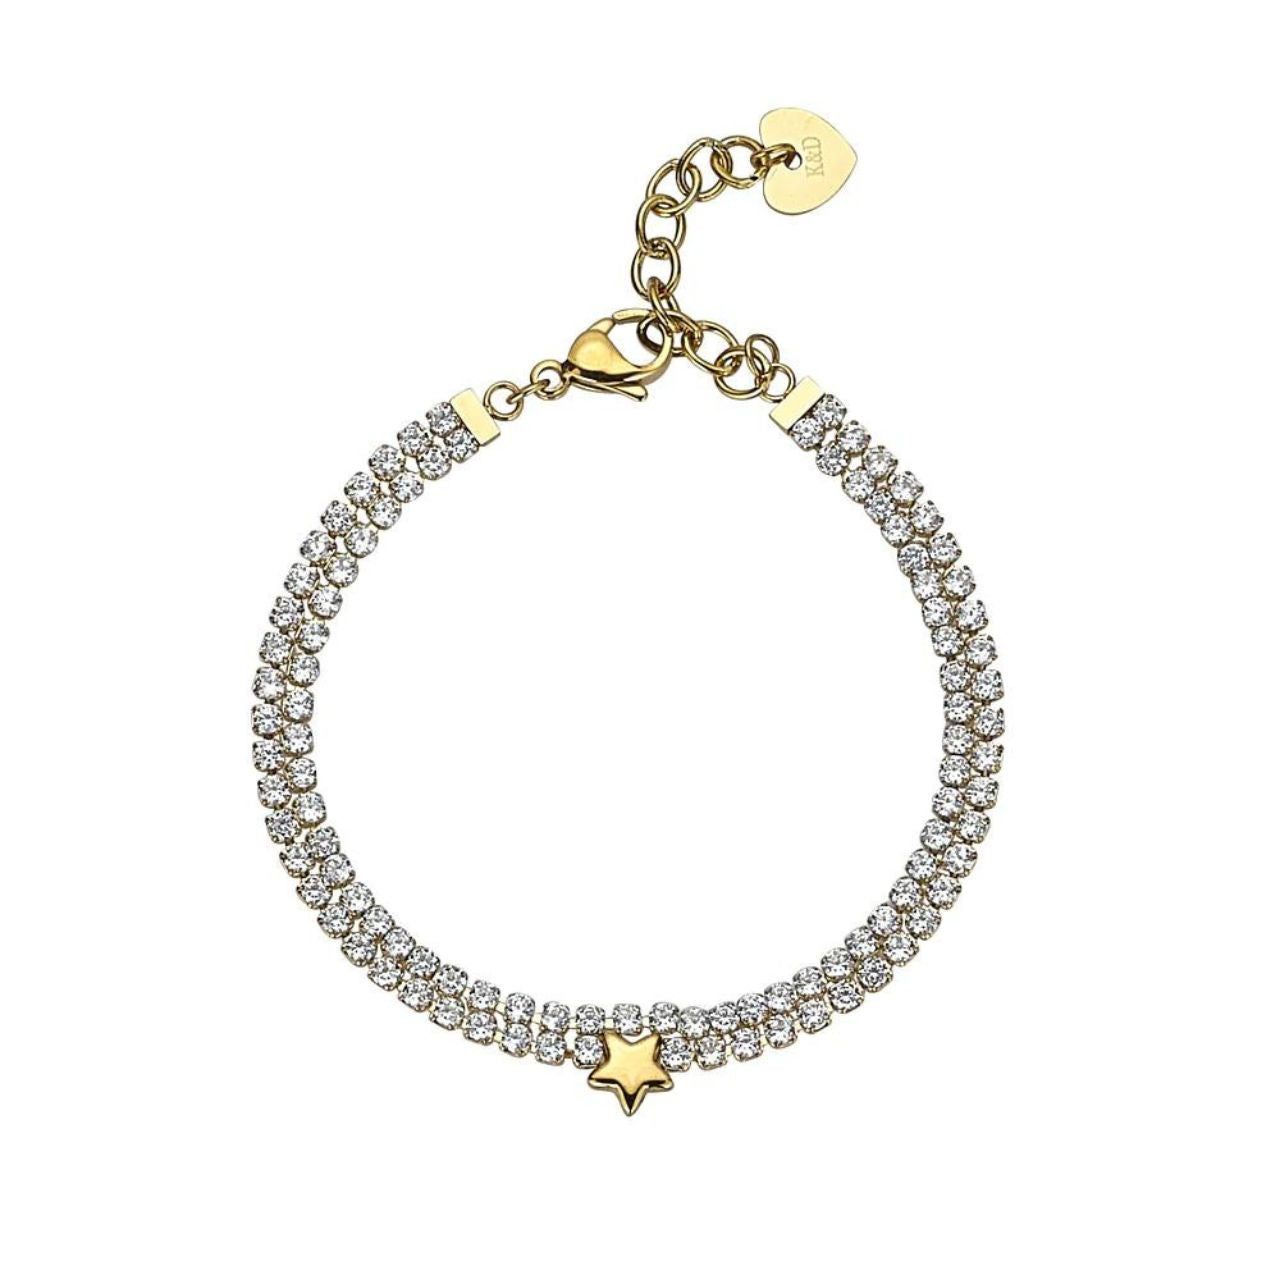 Knight & Day Star Tennis Bracelet  Double strand tennis bracelet embellished with gold plated centre star. Lobster claw fastening.